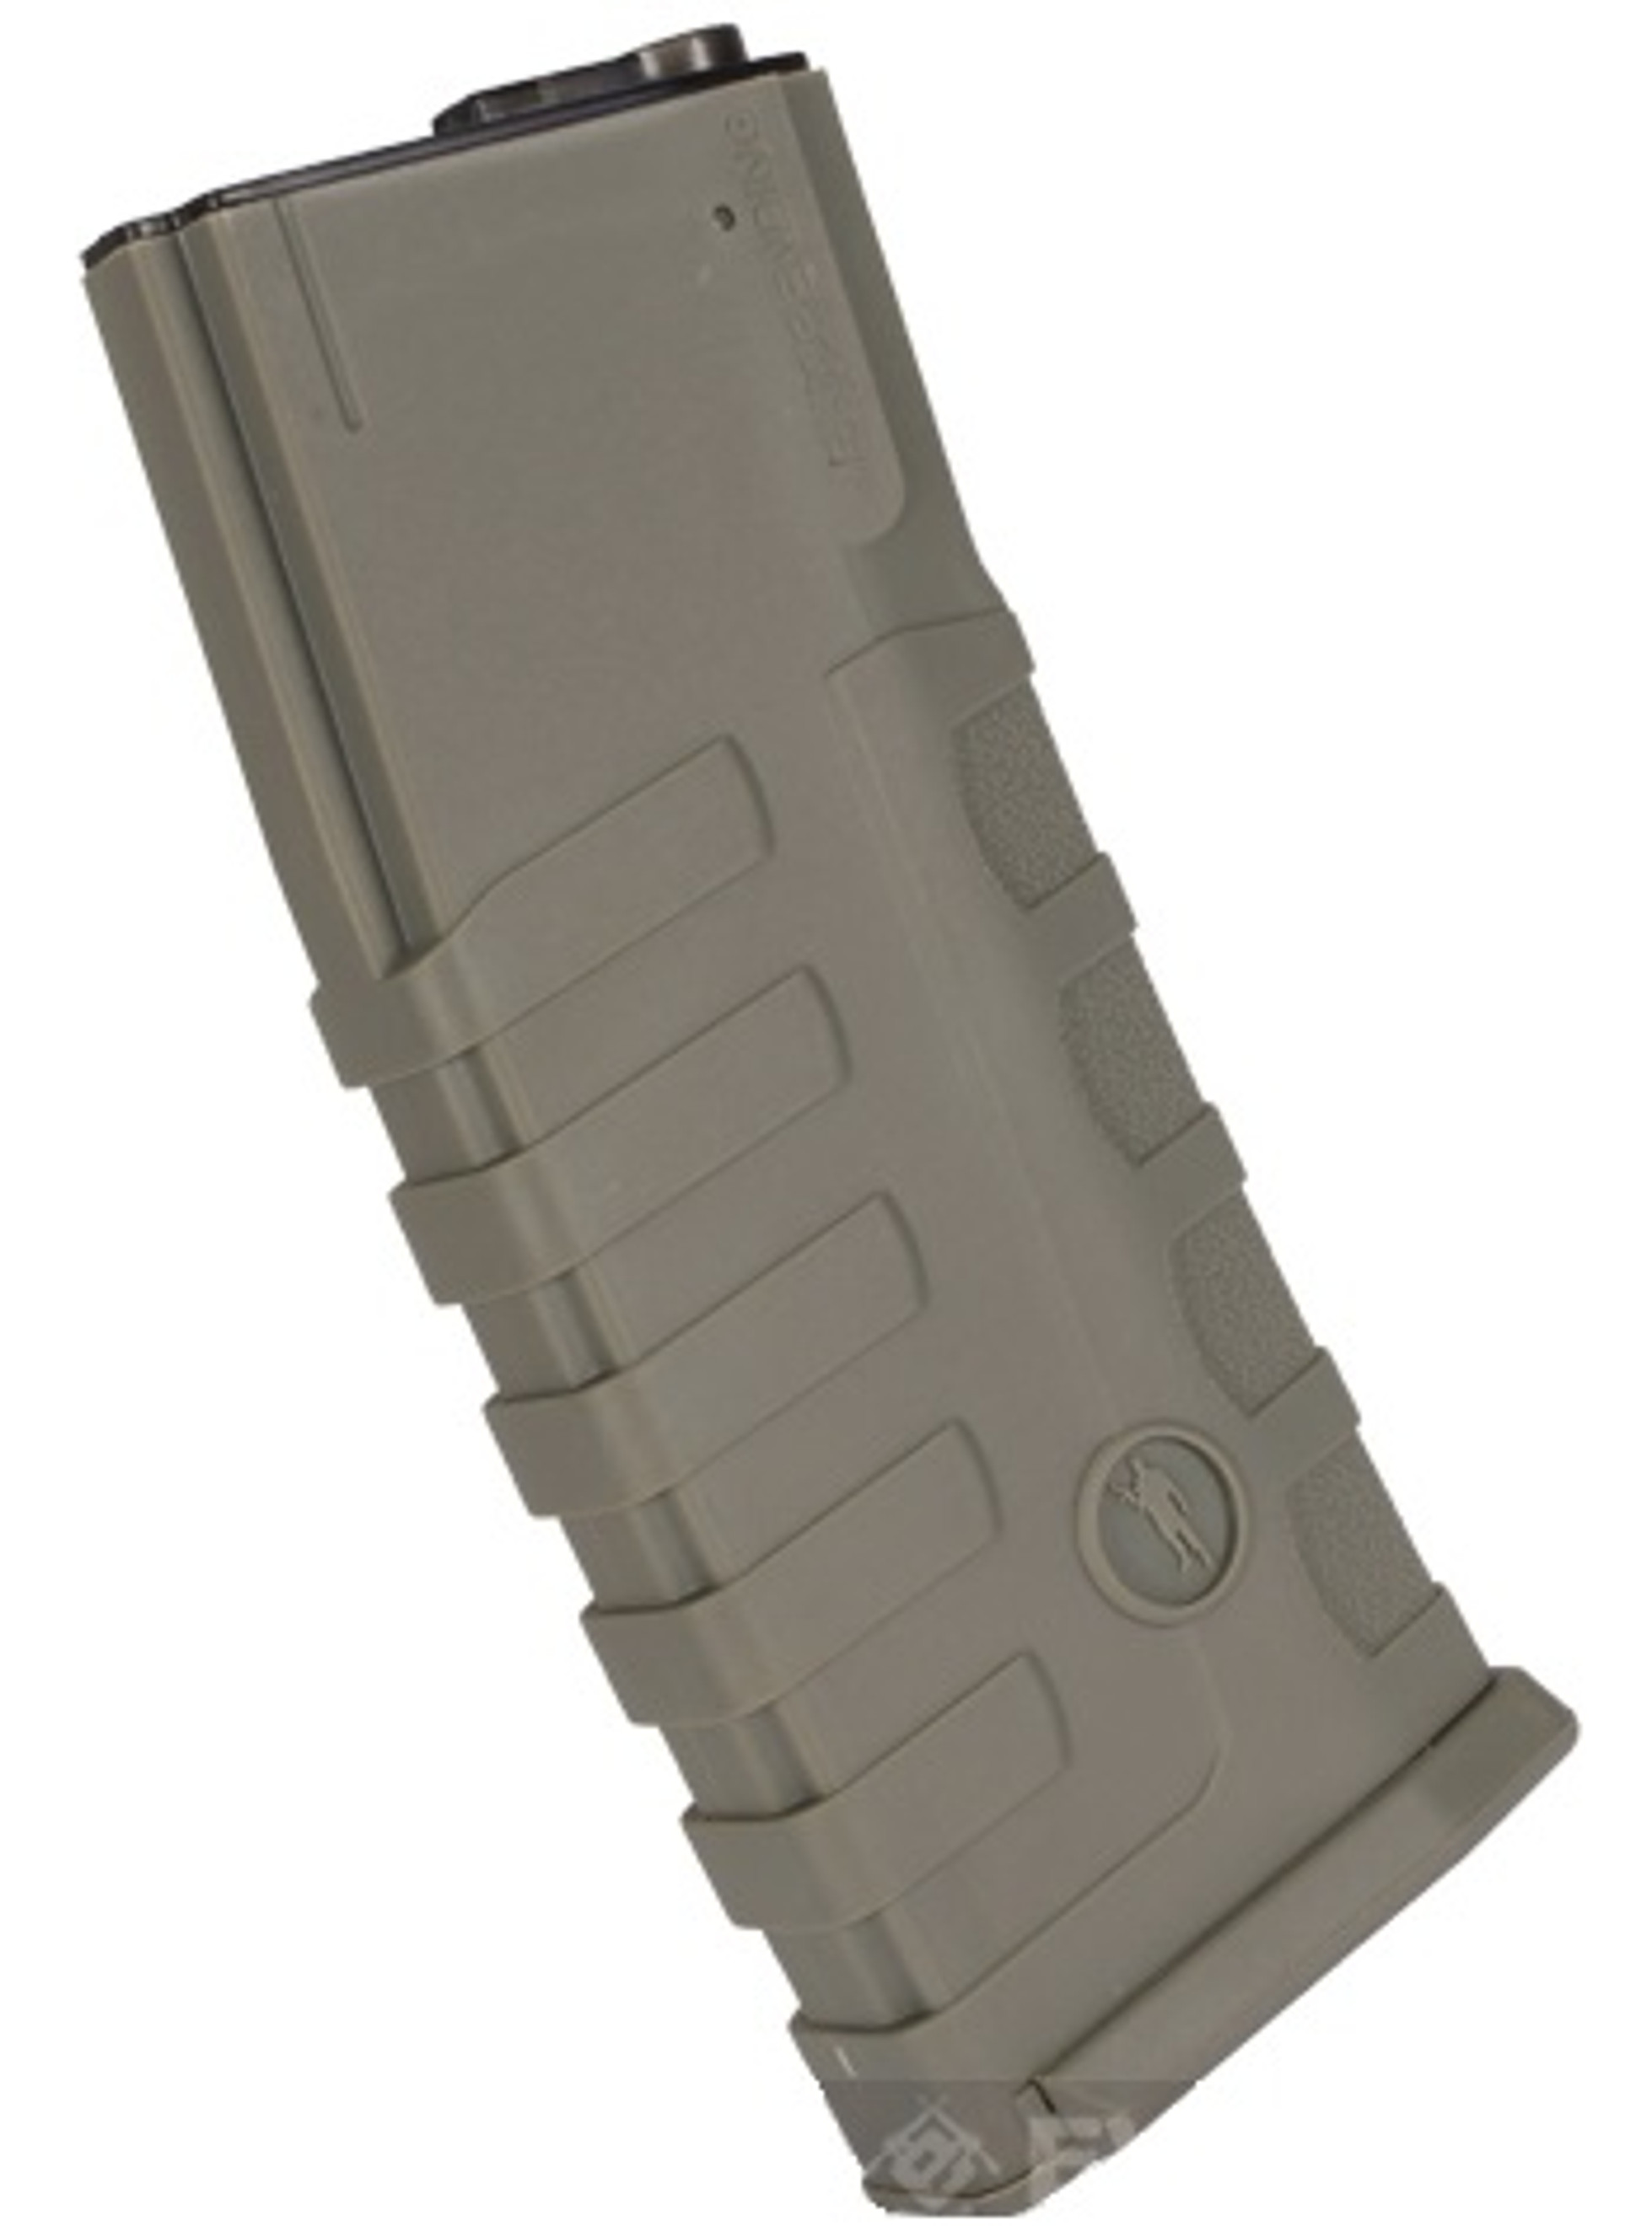 Command Arms CAA Licensed 360rd Mag For M4 M16 Airsoft AEG By King Arms - Dark Earth